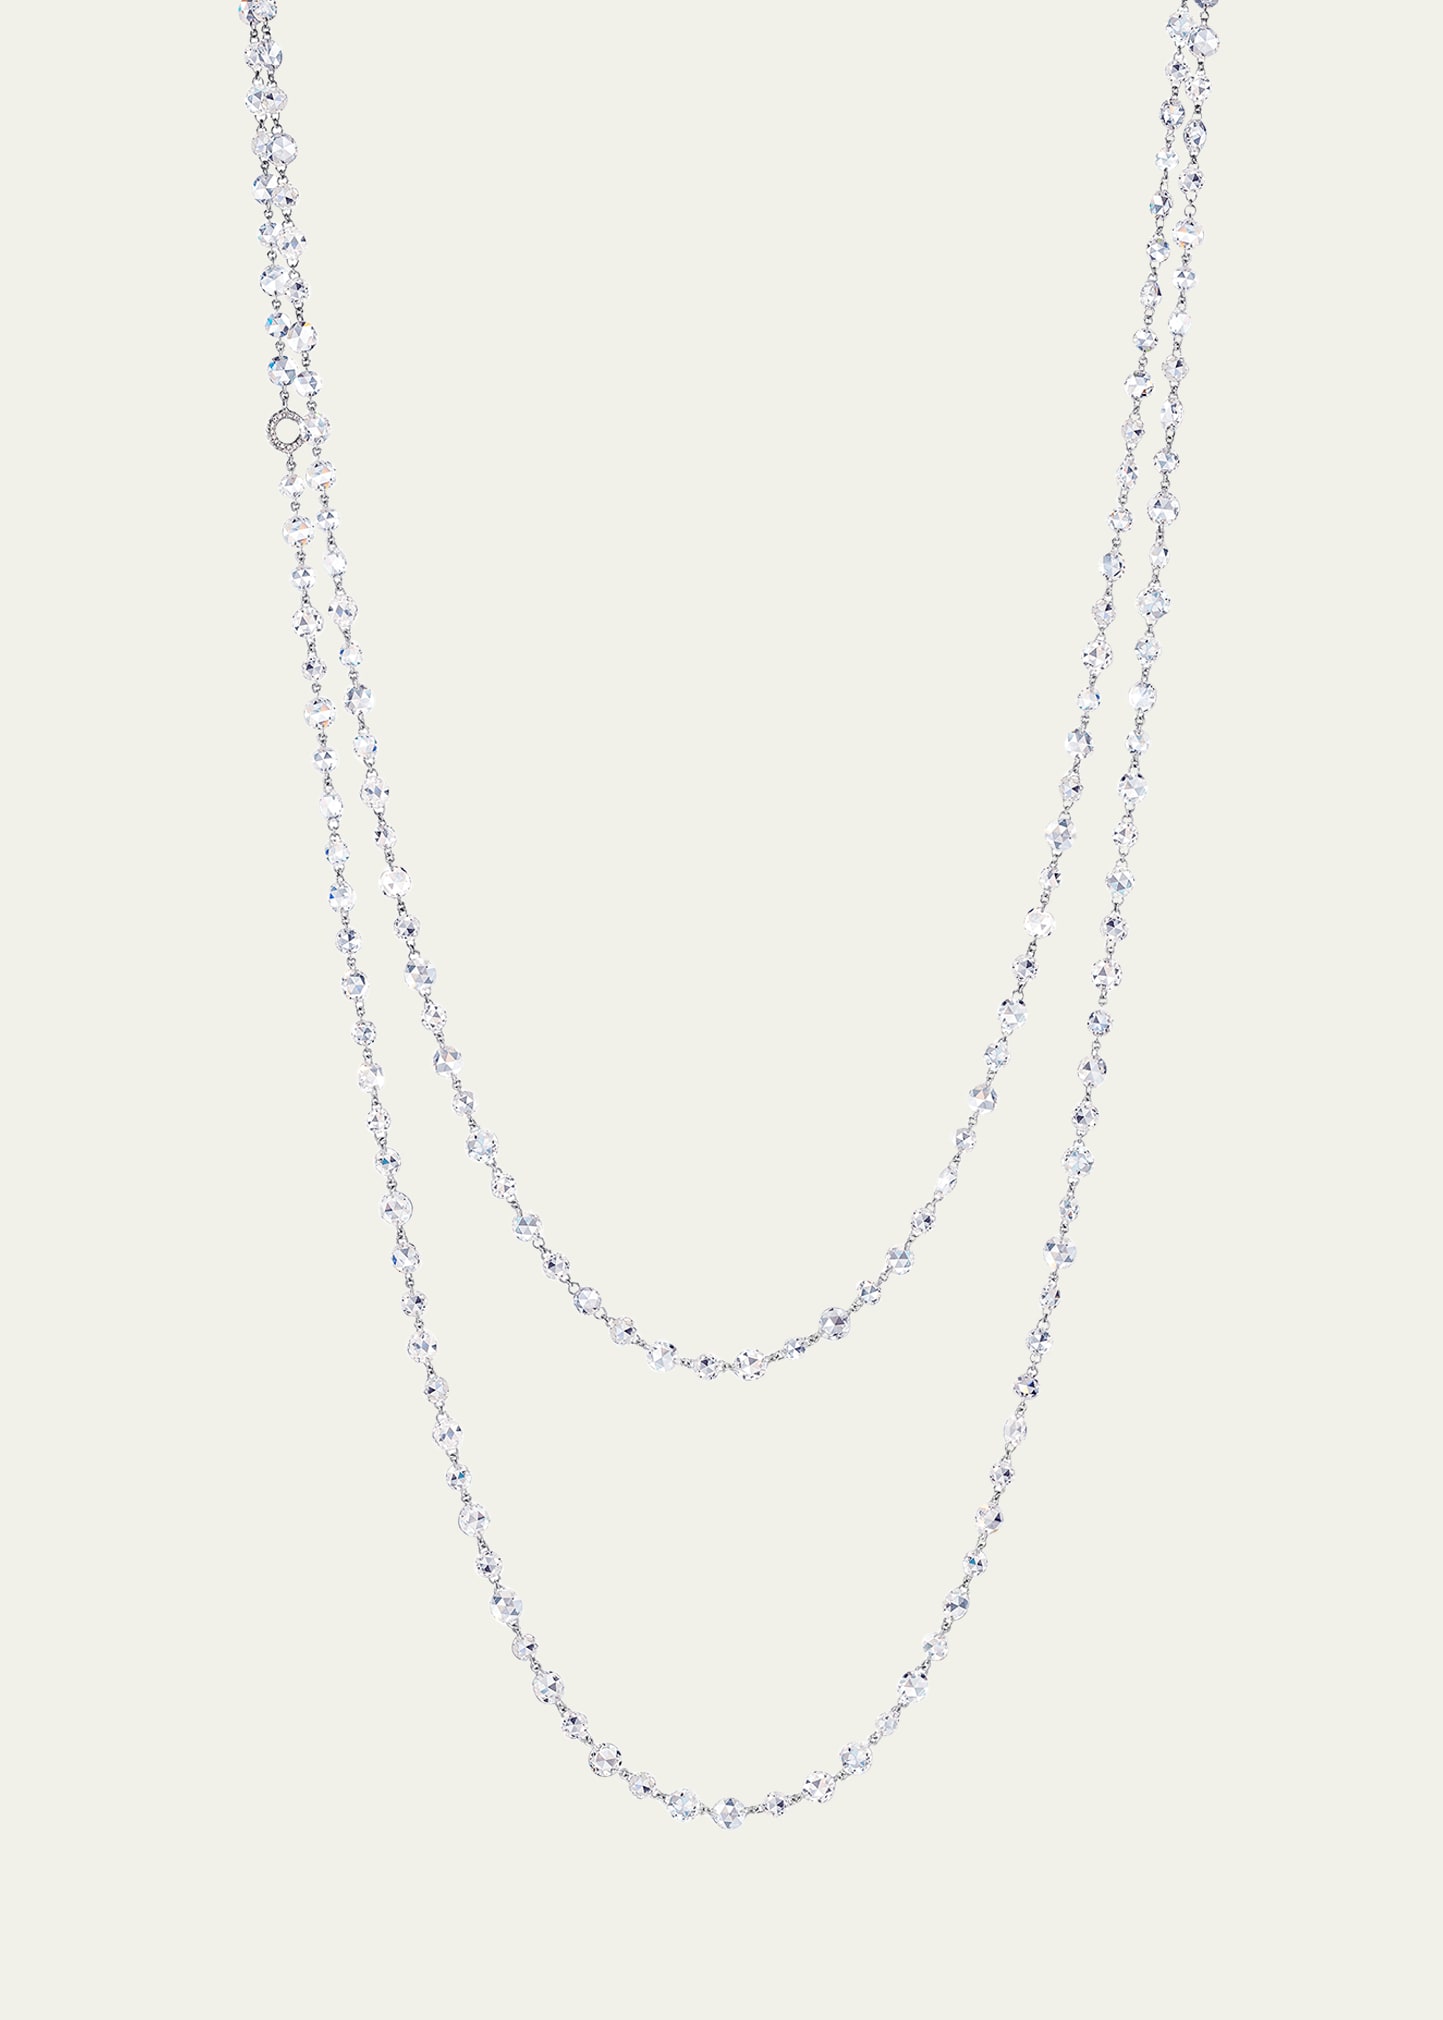 64 Facets 18k White Gold Alternating Size Diamond Necklace, 48in